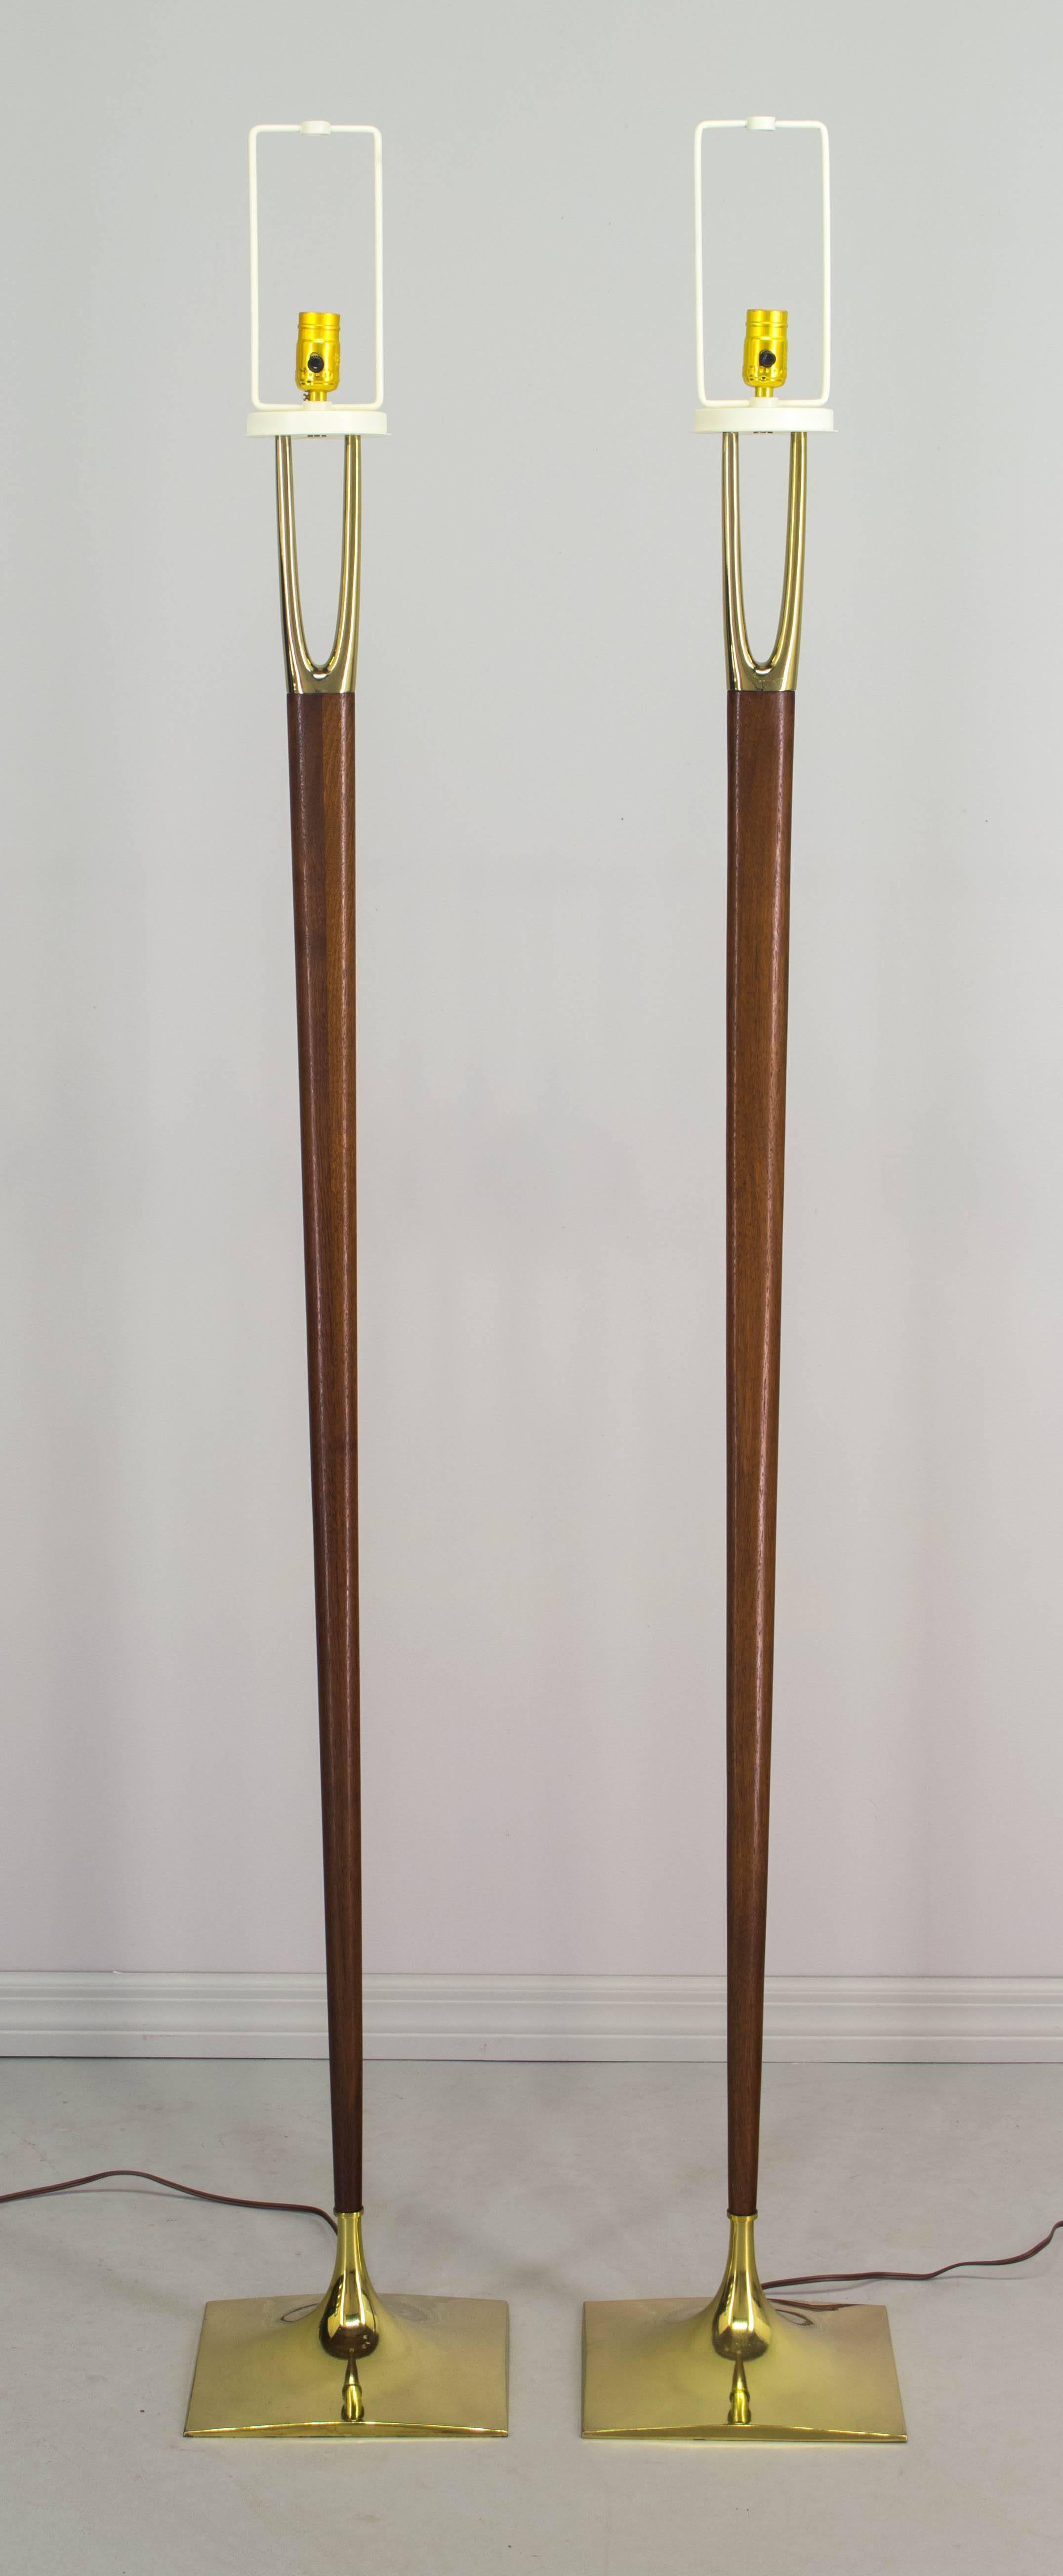 Pair of iconic, sought after Mid-Century Modern floor lamps designed by Gerald Thurston and made by the Laurel Lamp Company. Solid walnut center post with beautiful wood grain. Brass-plated wishbone shaped prong at top and a brass-plated base.